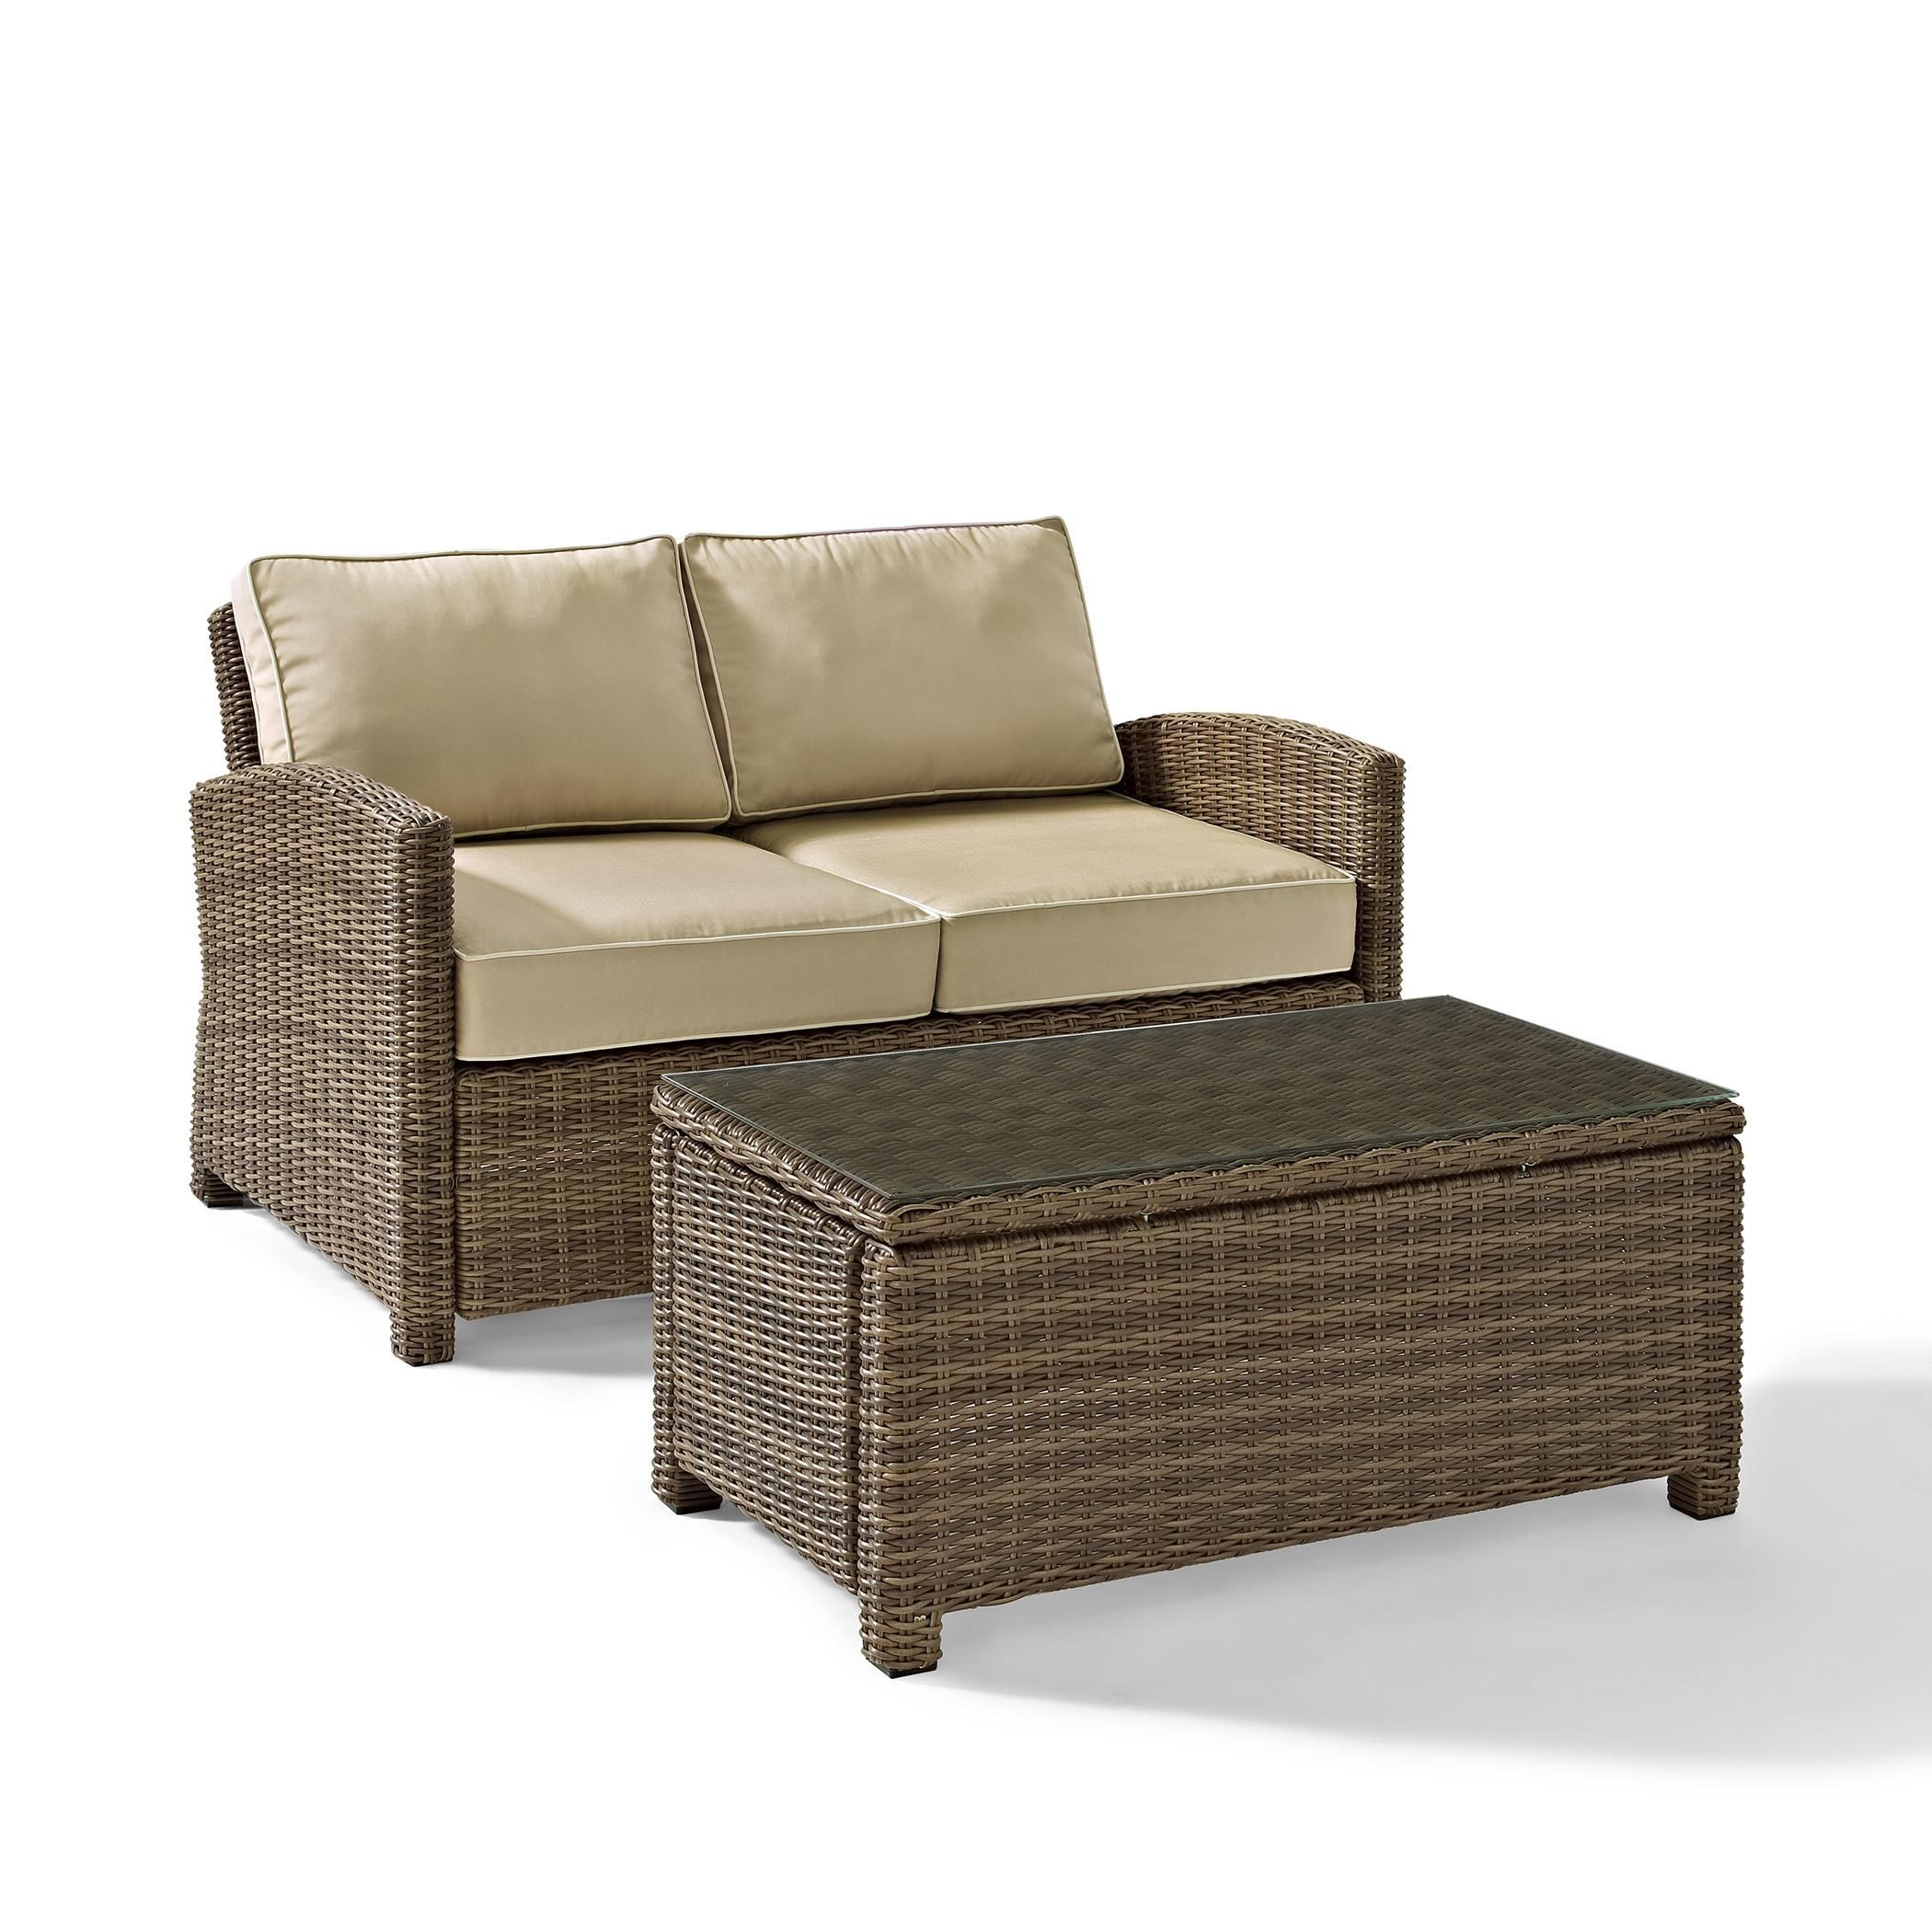 Crosley Biltmore 2 Piece Outdoor Wicker Seating Set With Sand Cushions Regarding 2 Piece Outdoor Wicker Sectional Sofa Sets (View 4 of 15)